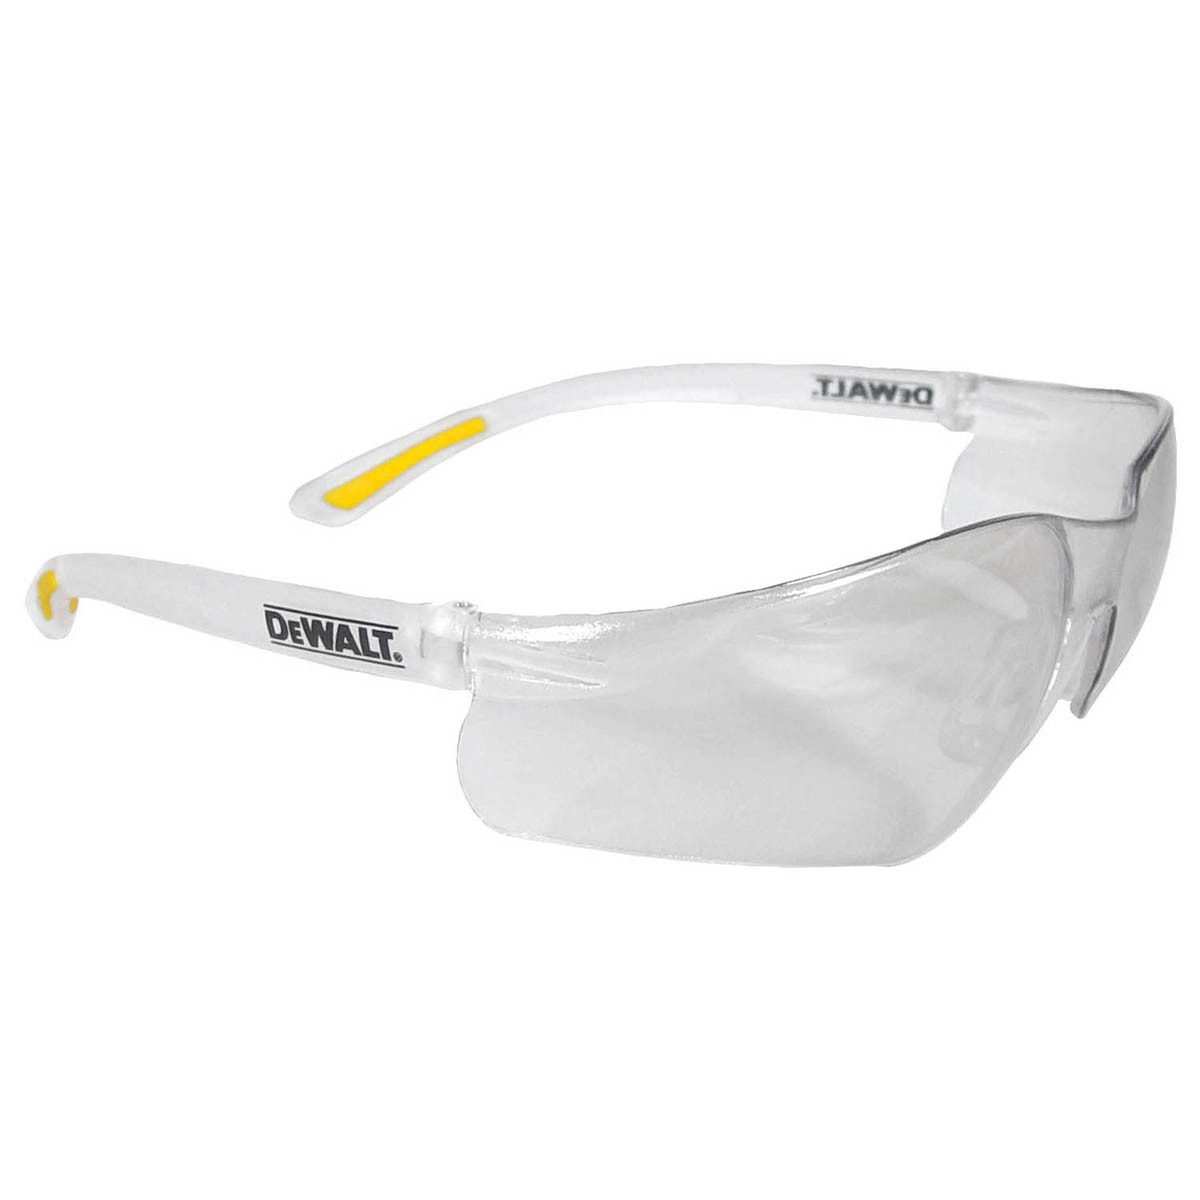 Dewalt Contractor Pro Safety Glasses w/ Clear Lens